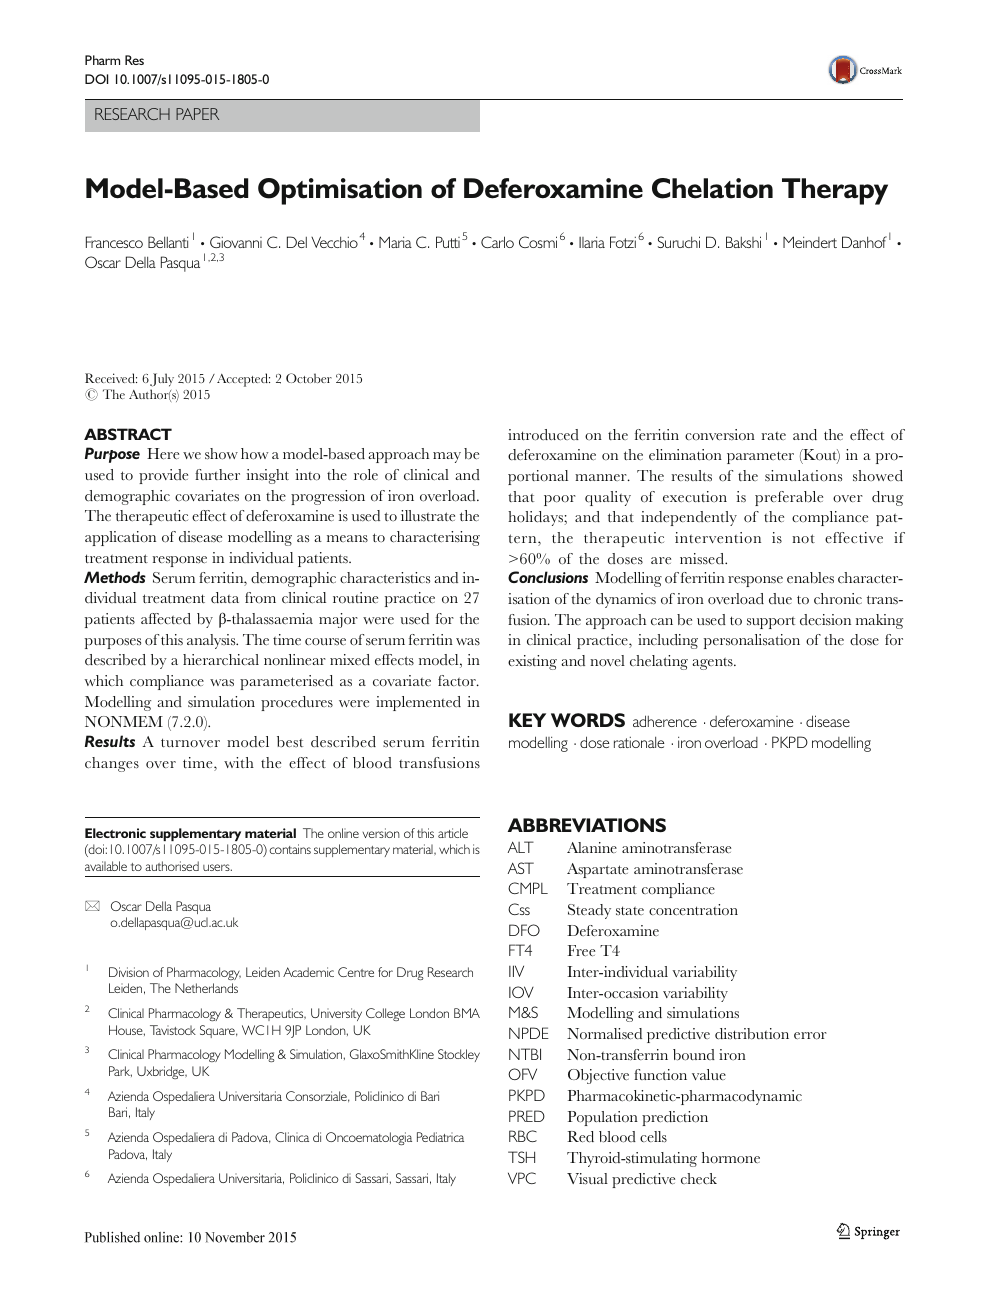 Model Based Optimisation Of Deferoxamine Chelation Therapy Topic Of Research Paper In Clinical Medicine Download Scholarly Article Pdf And Read For Free On Cyberleninka Open Science Hub